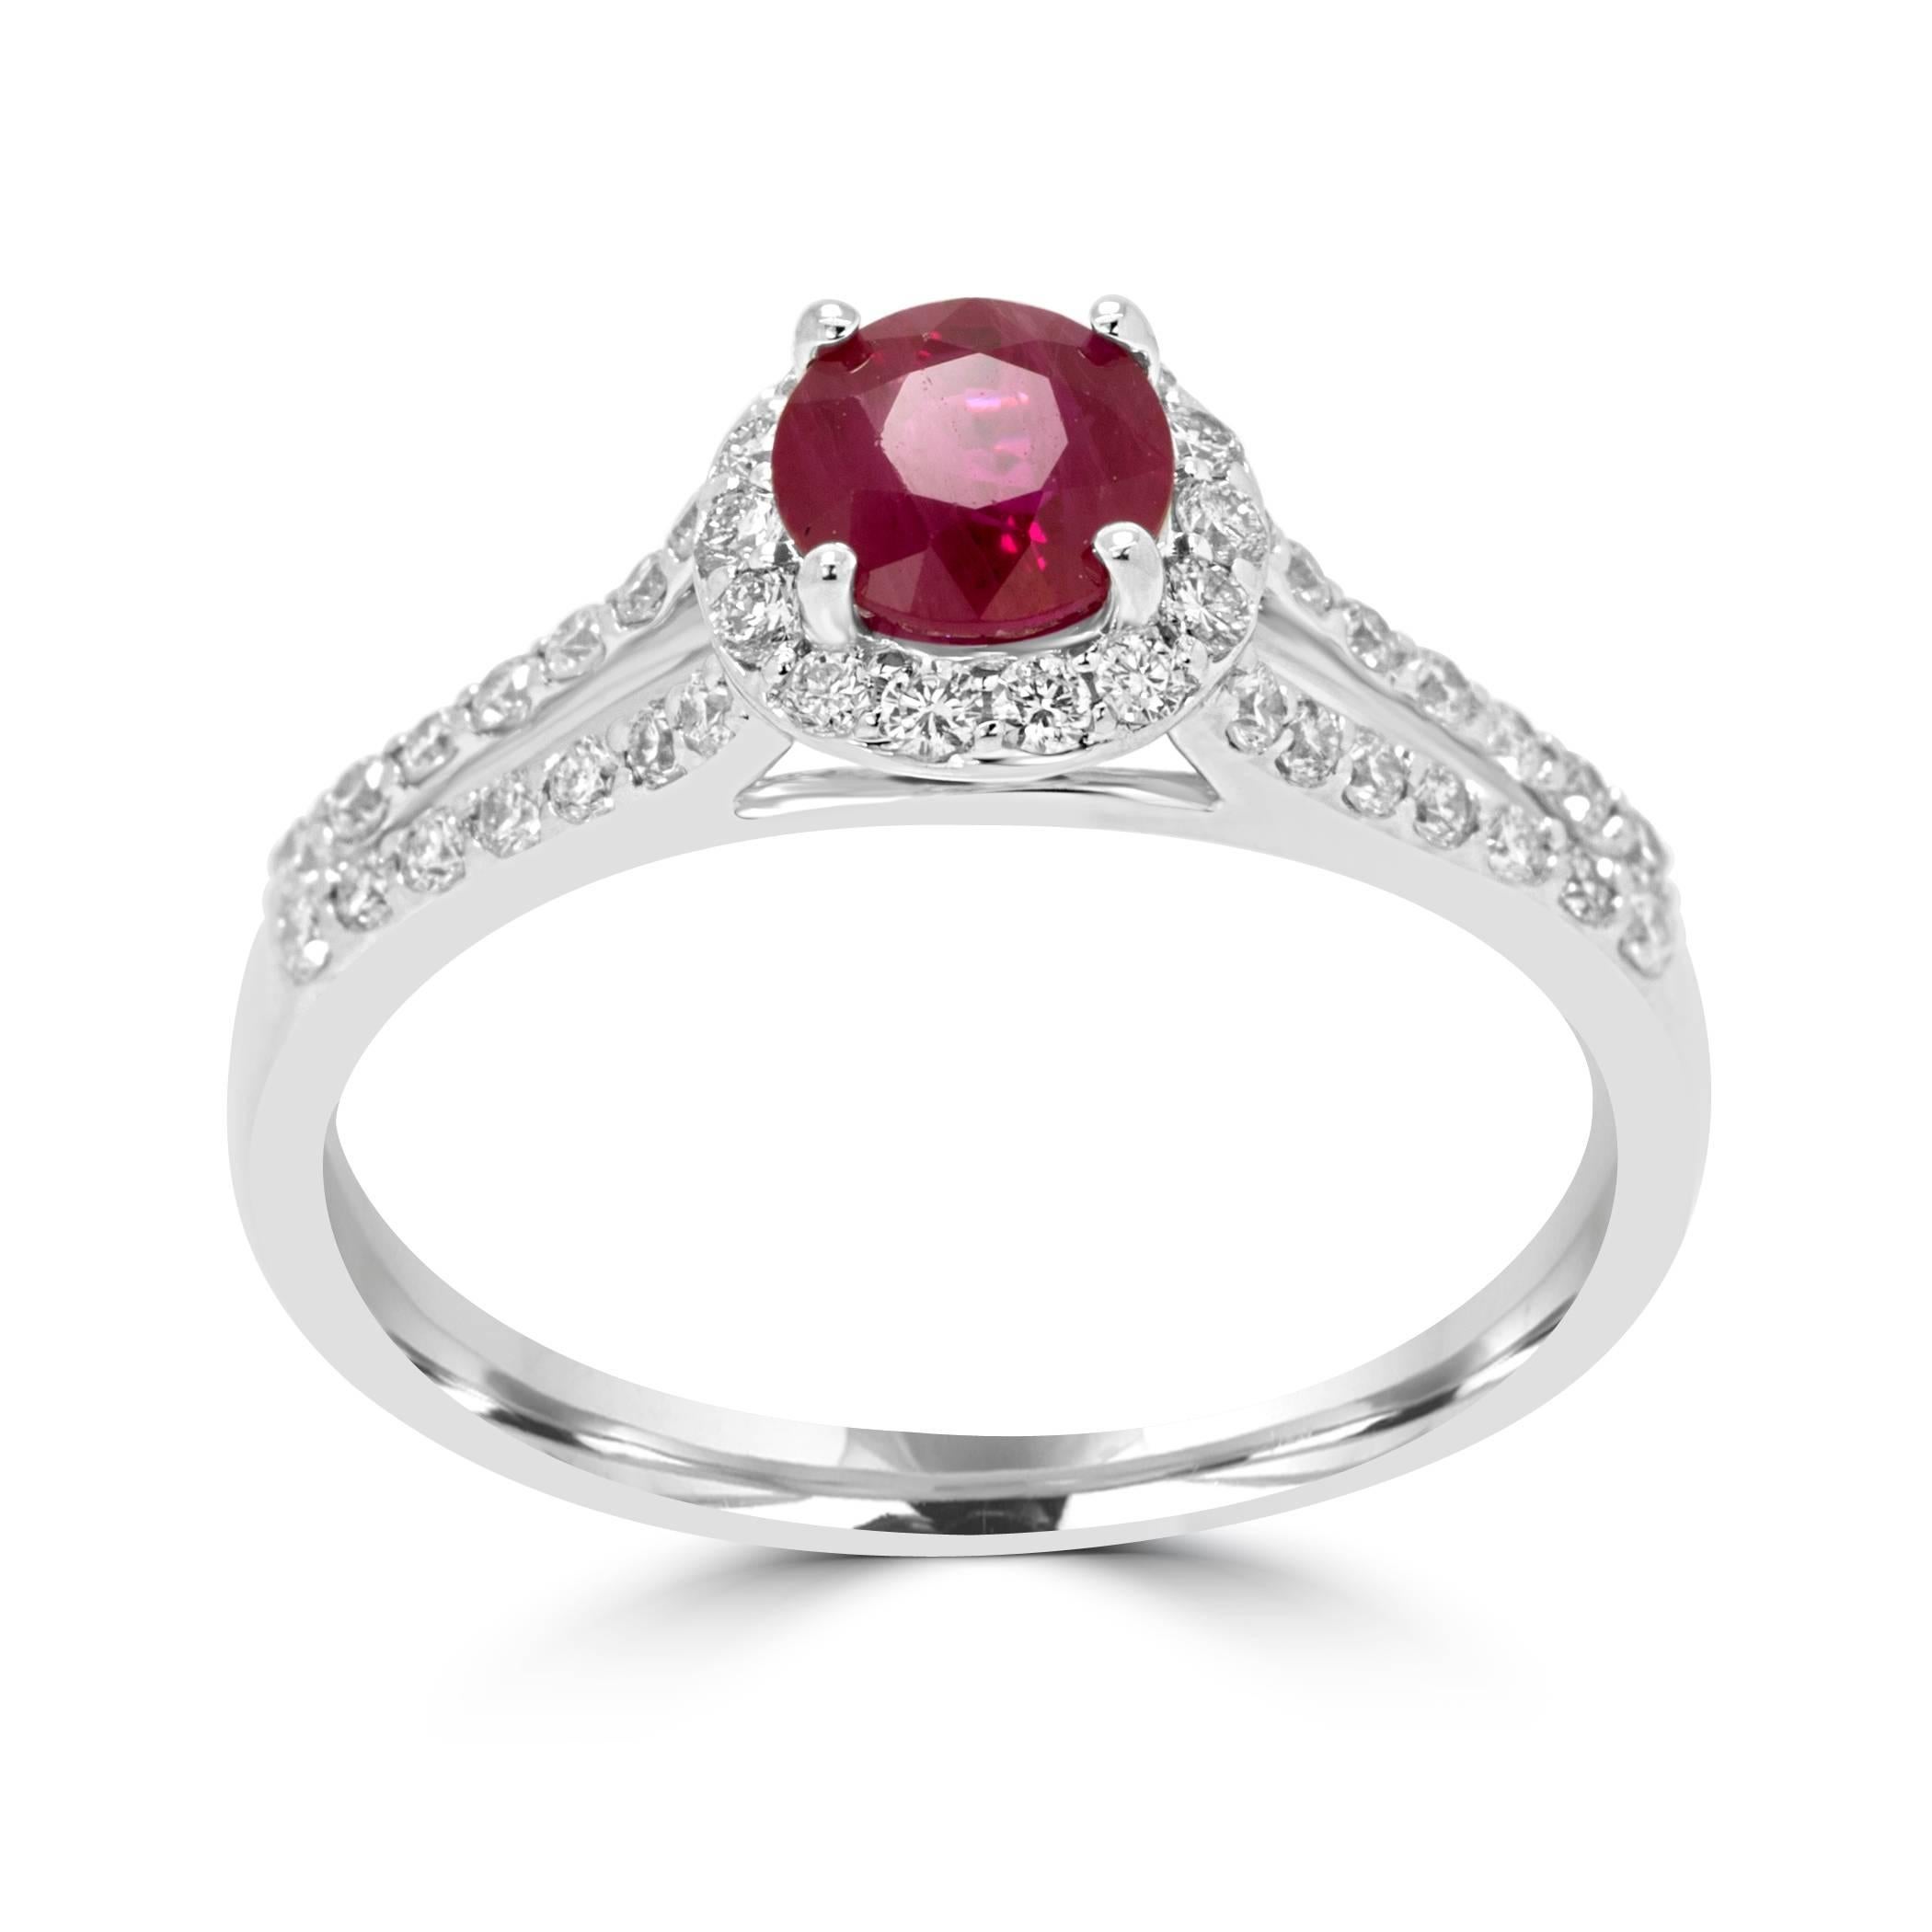  Ruby Round Diamond Cut 0.74 Carat Encircled in a Single Halo of White Diamond Round 0.40 Carat in 14K White Gold Simple Classic Split Shank Ring Bridal Fashion Cocktail Ring.

Style available in different price ranges. Prices are based on your